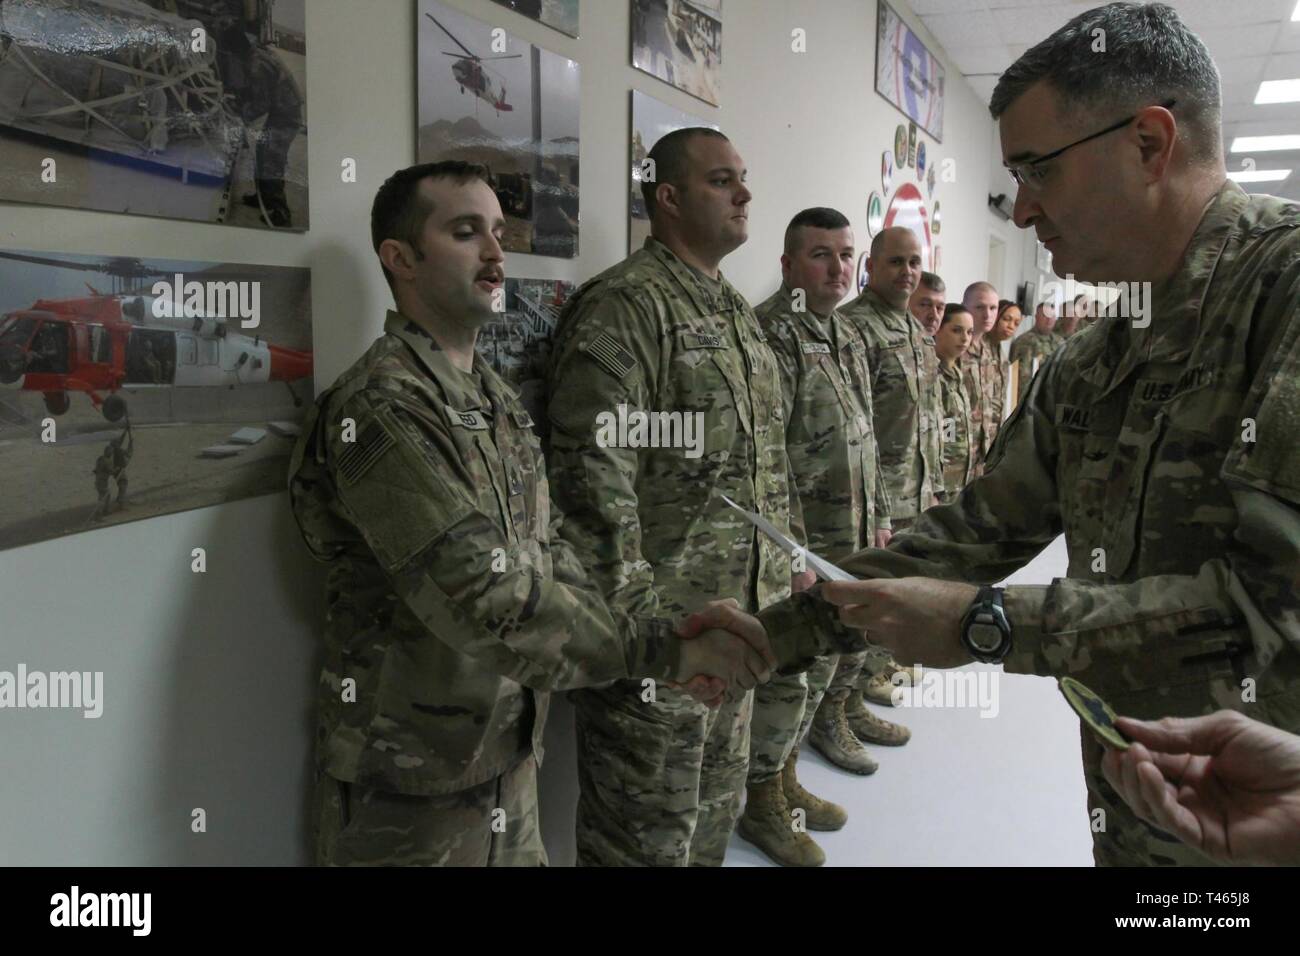 Brig. Gen. Clint E. Walker, commanding general of the 184th Sustainment Command, presents a certificate of wartime service to Staff Sgt. Kelcy Weed following the placement of the 184th ESC patch on his right shoulder at Camp Arifjan, Kuwait, Mar. 3, 2019. Stock Photo